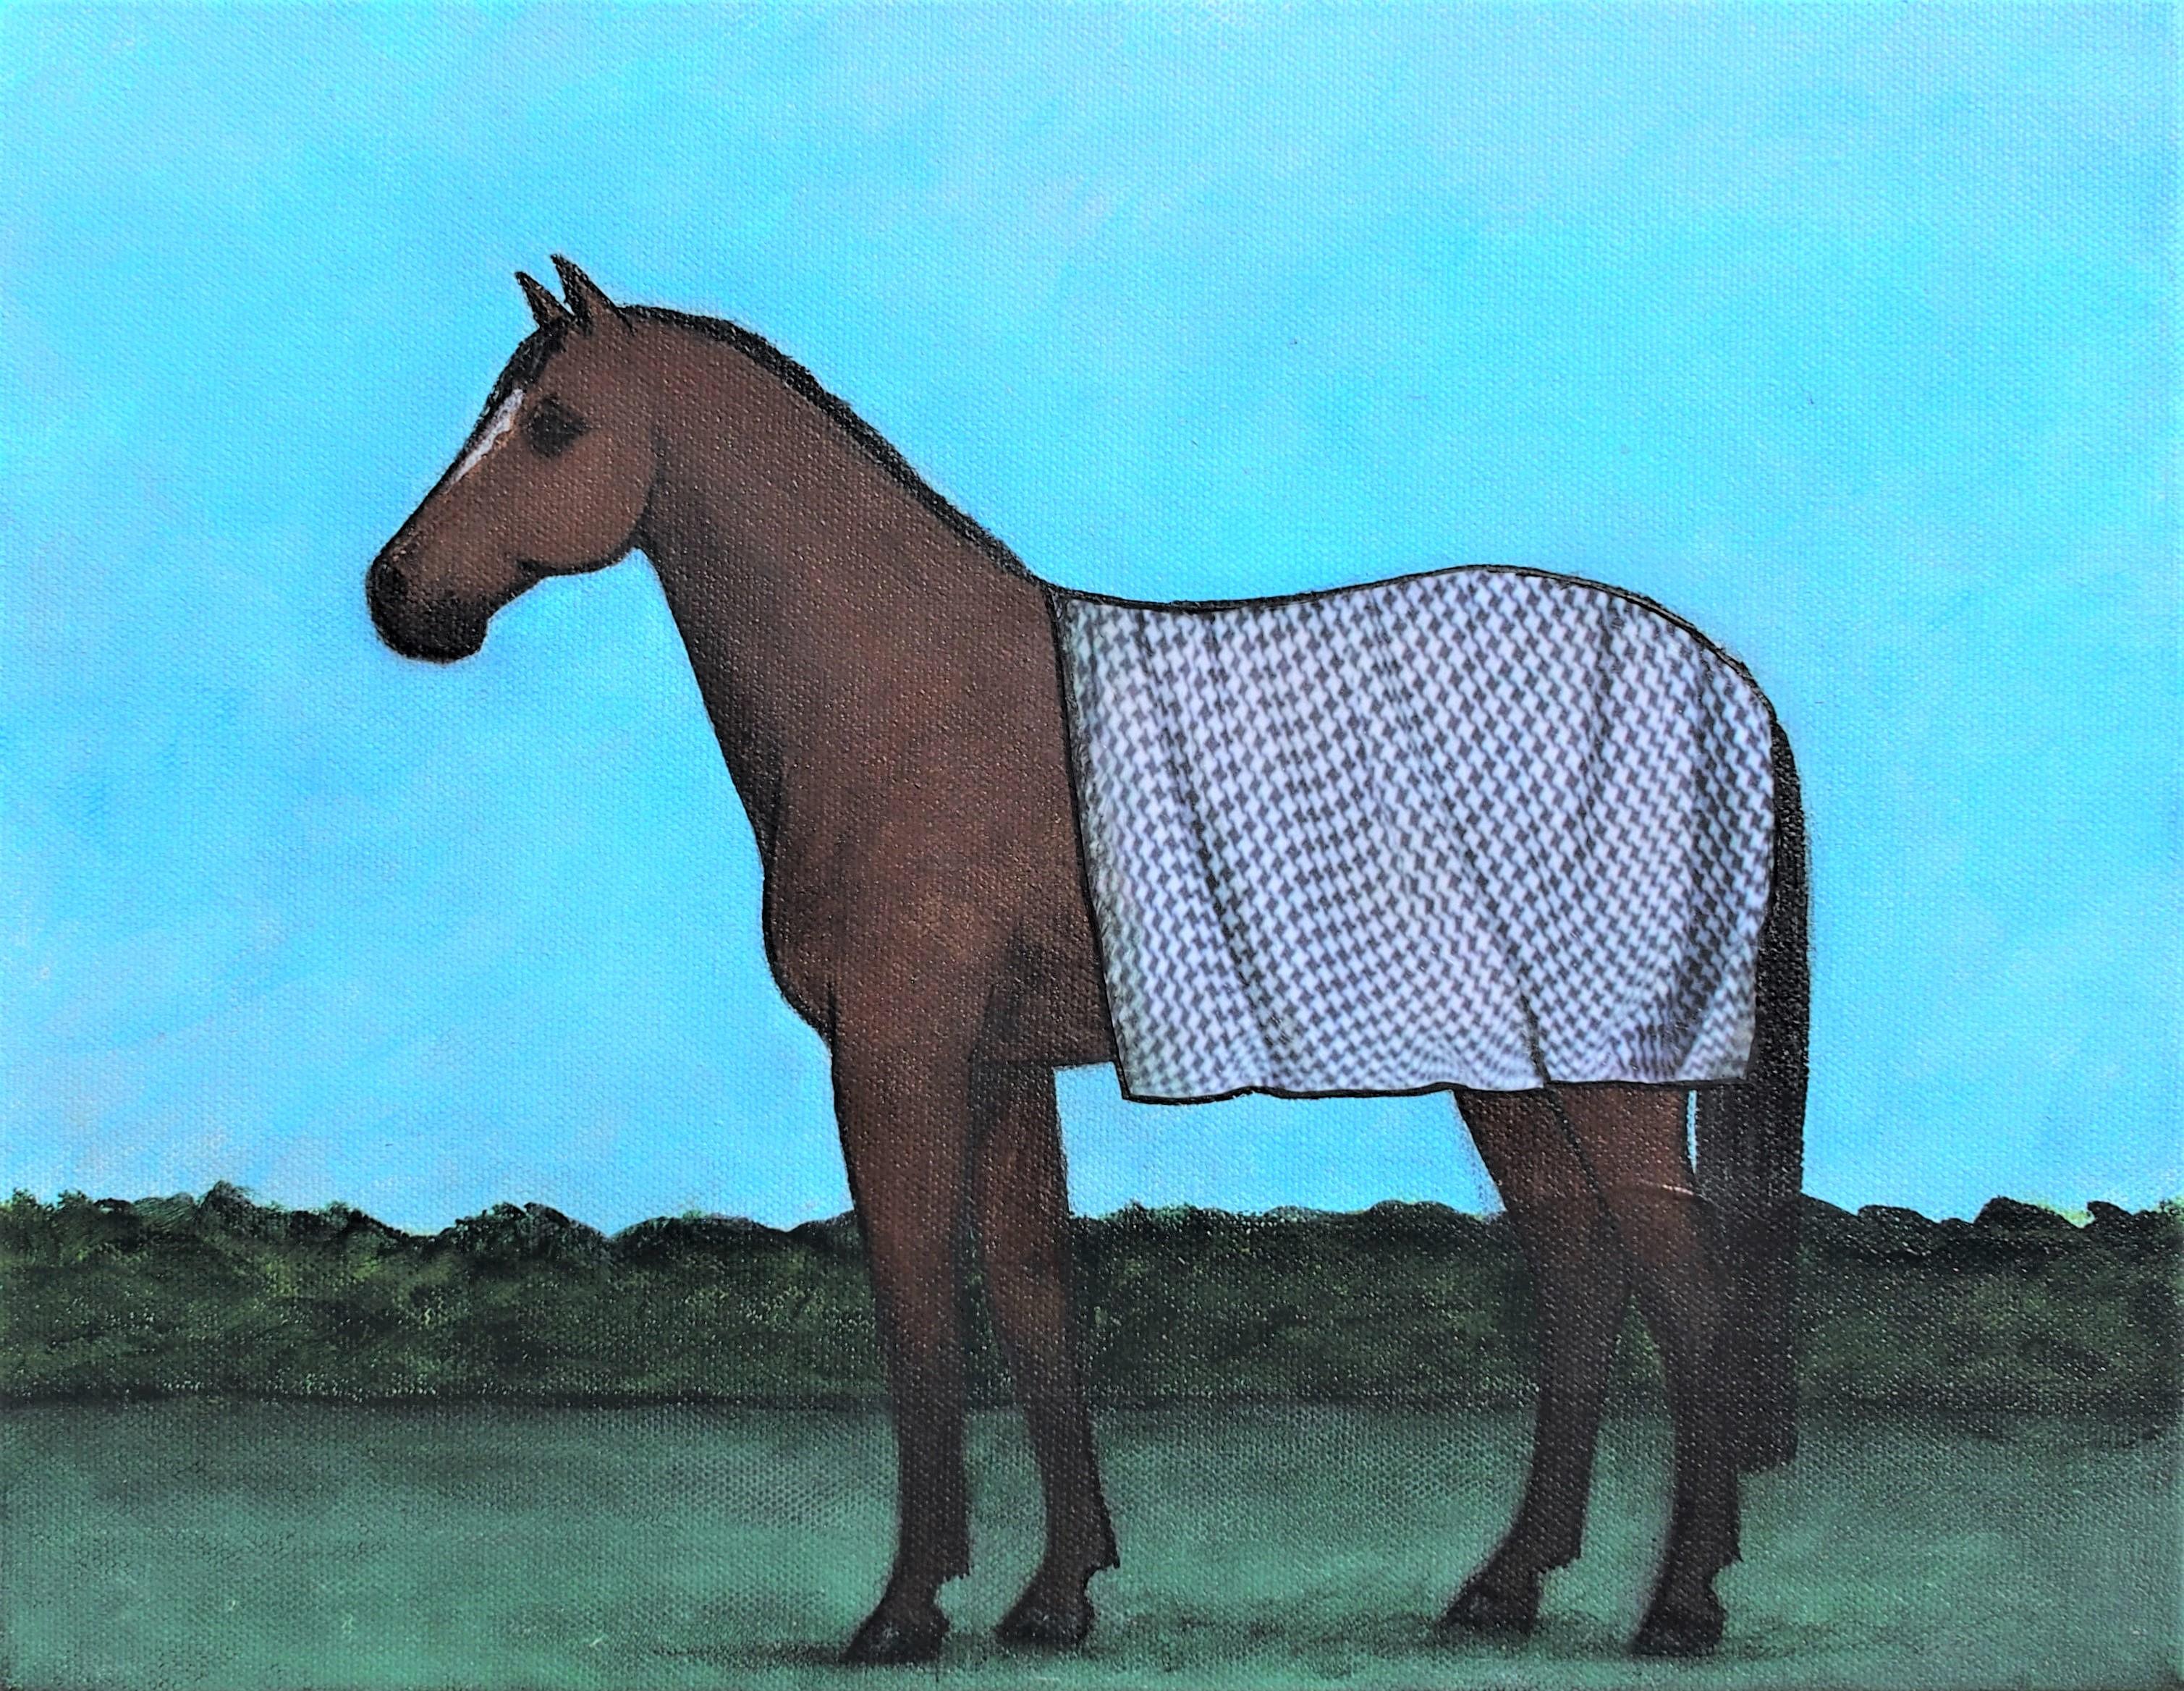 Security Blanket On A Bay Horse, Original Painting